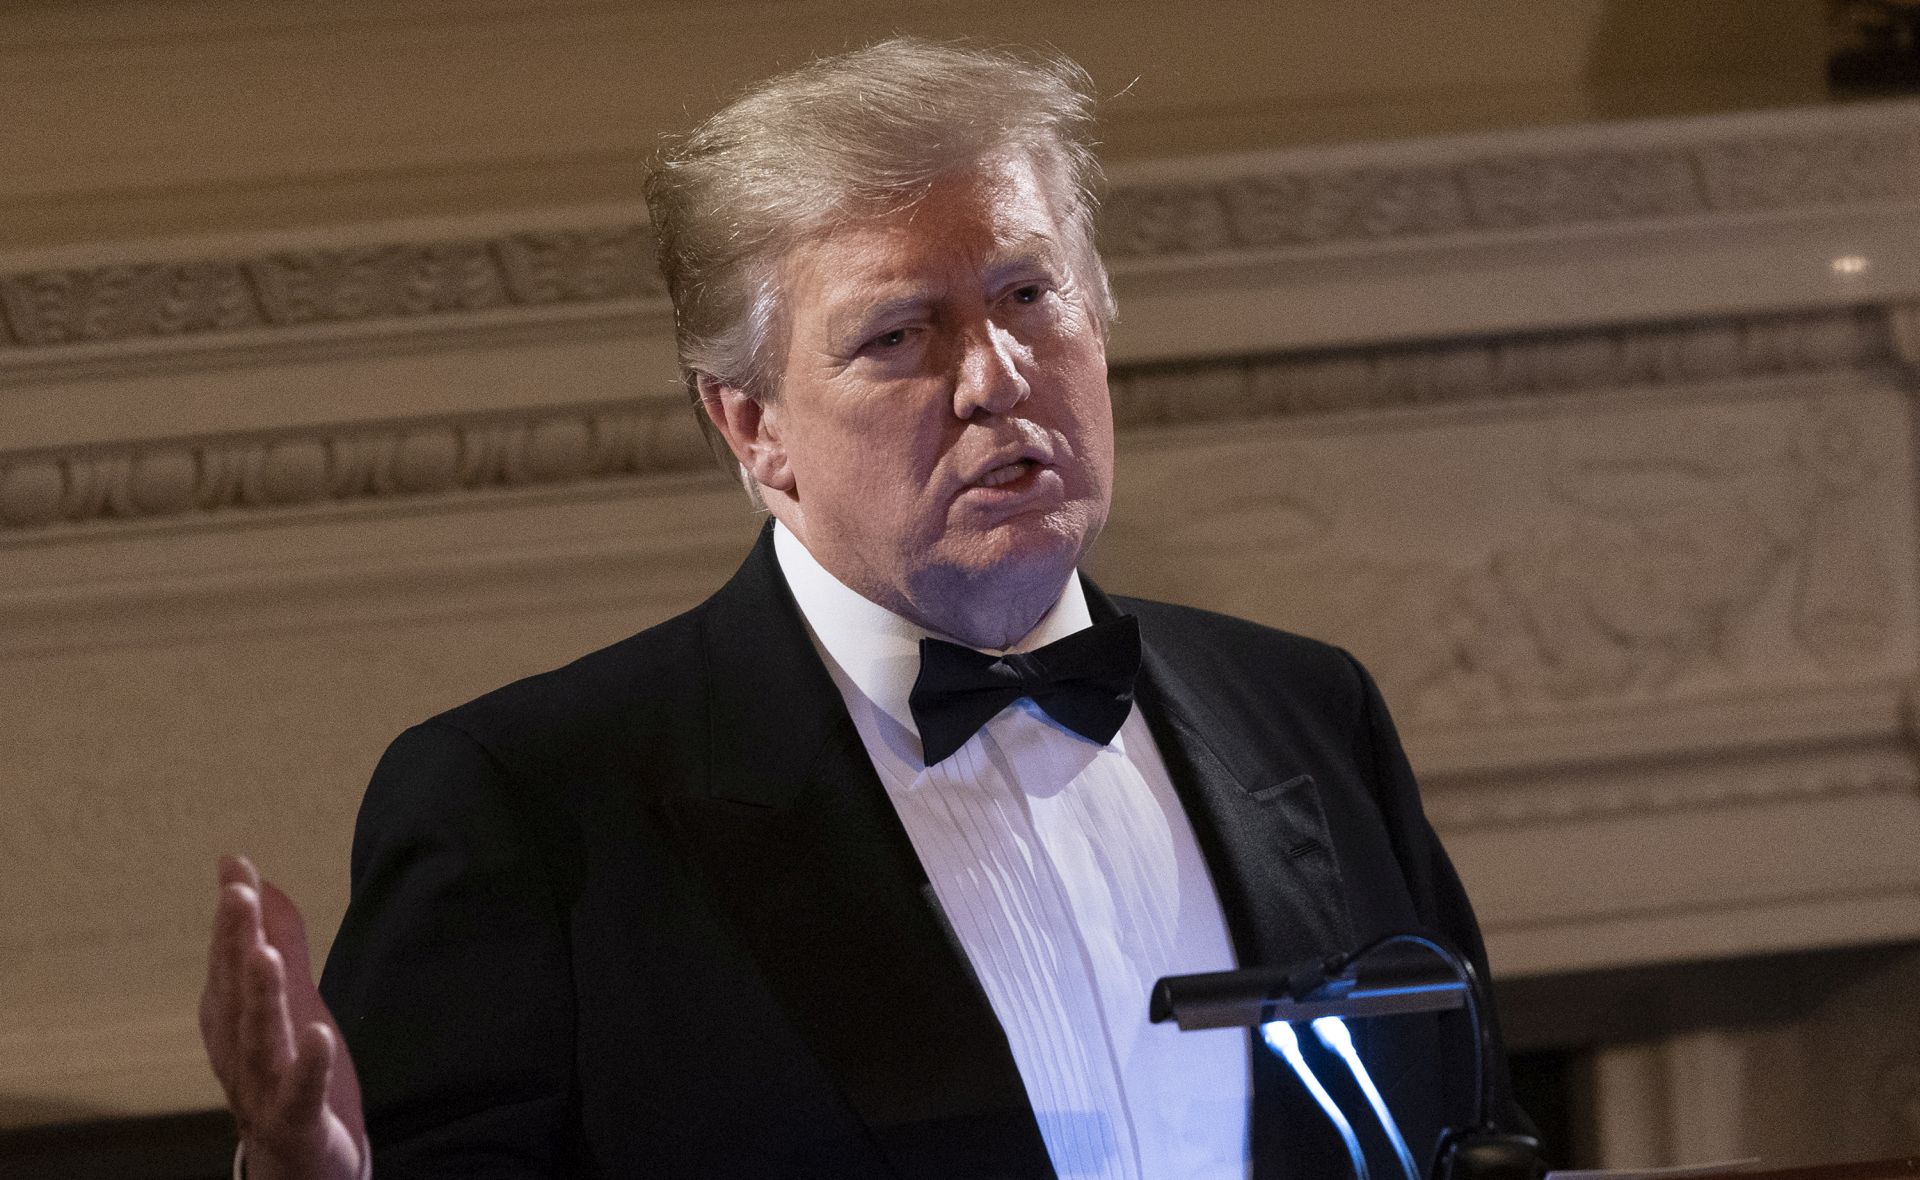 epa07394883 US President Donald J. Trump addresses the Governors' Ball at The White House, in Washington, DC, USA, 24 February 2019.  EPA/Chris Kleponis / POOL